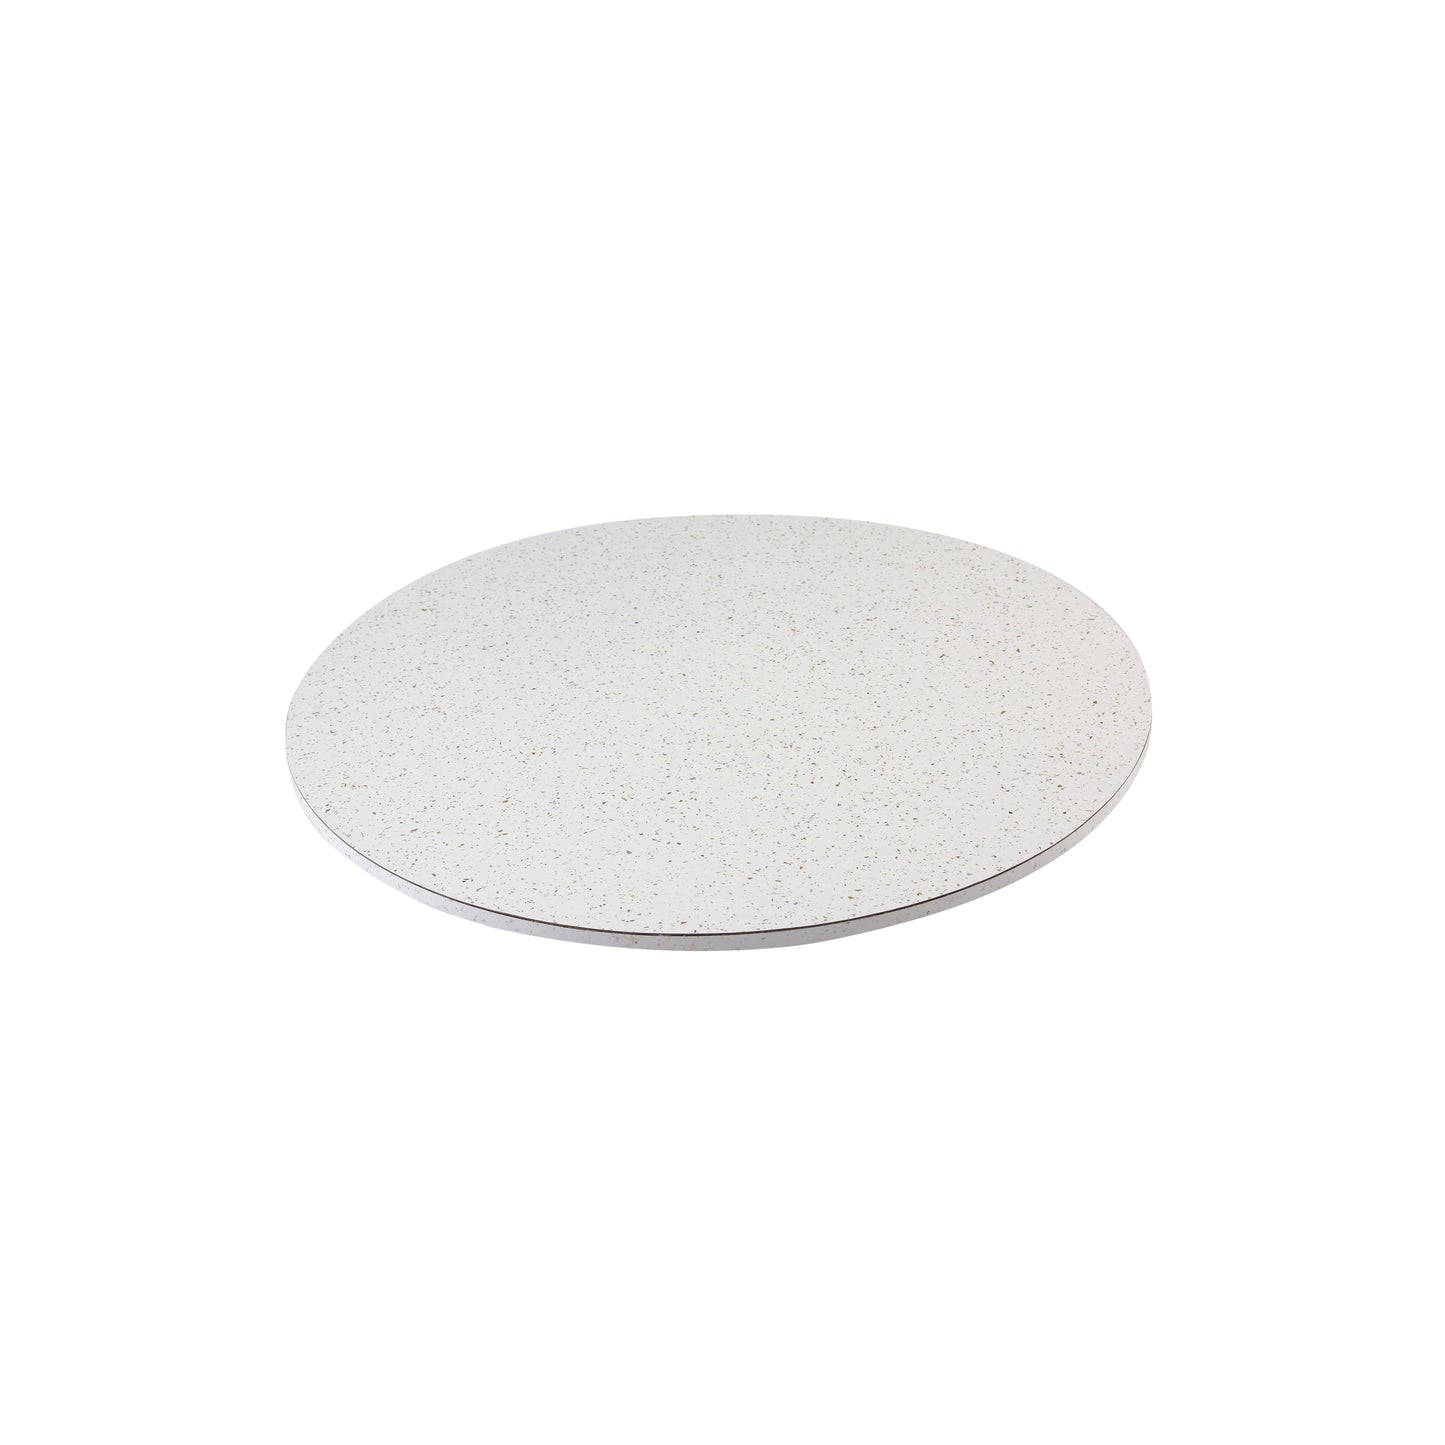 A Tiny Mistake White Granite Wooden Table Turner, Dining Table Organisation, Lazy Susan for Dining Room Decor